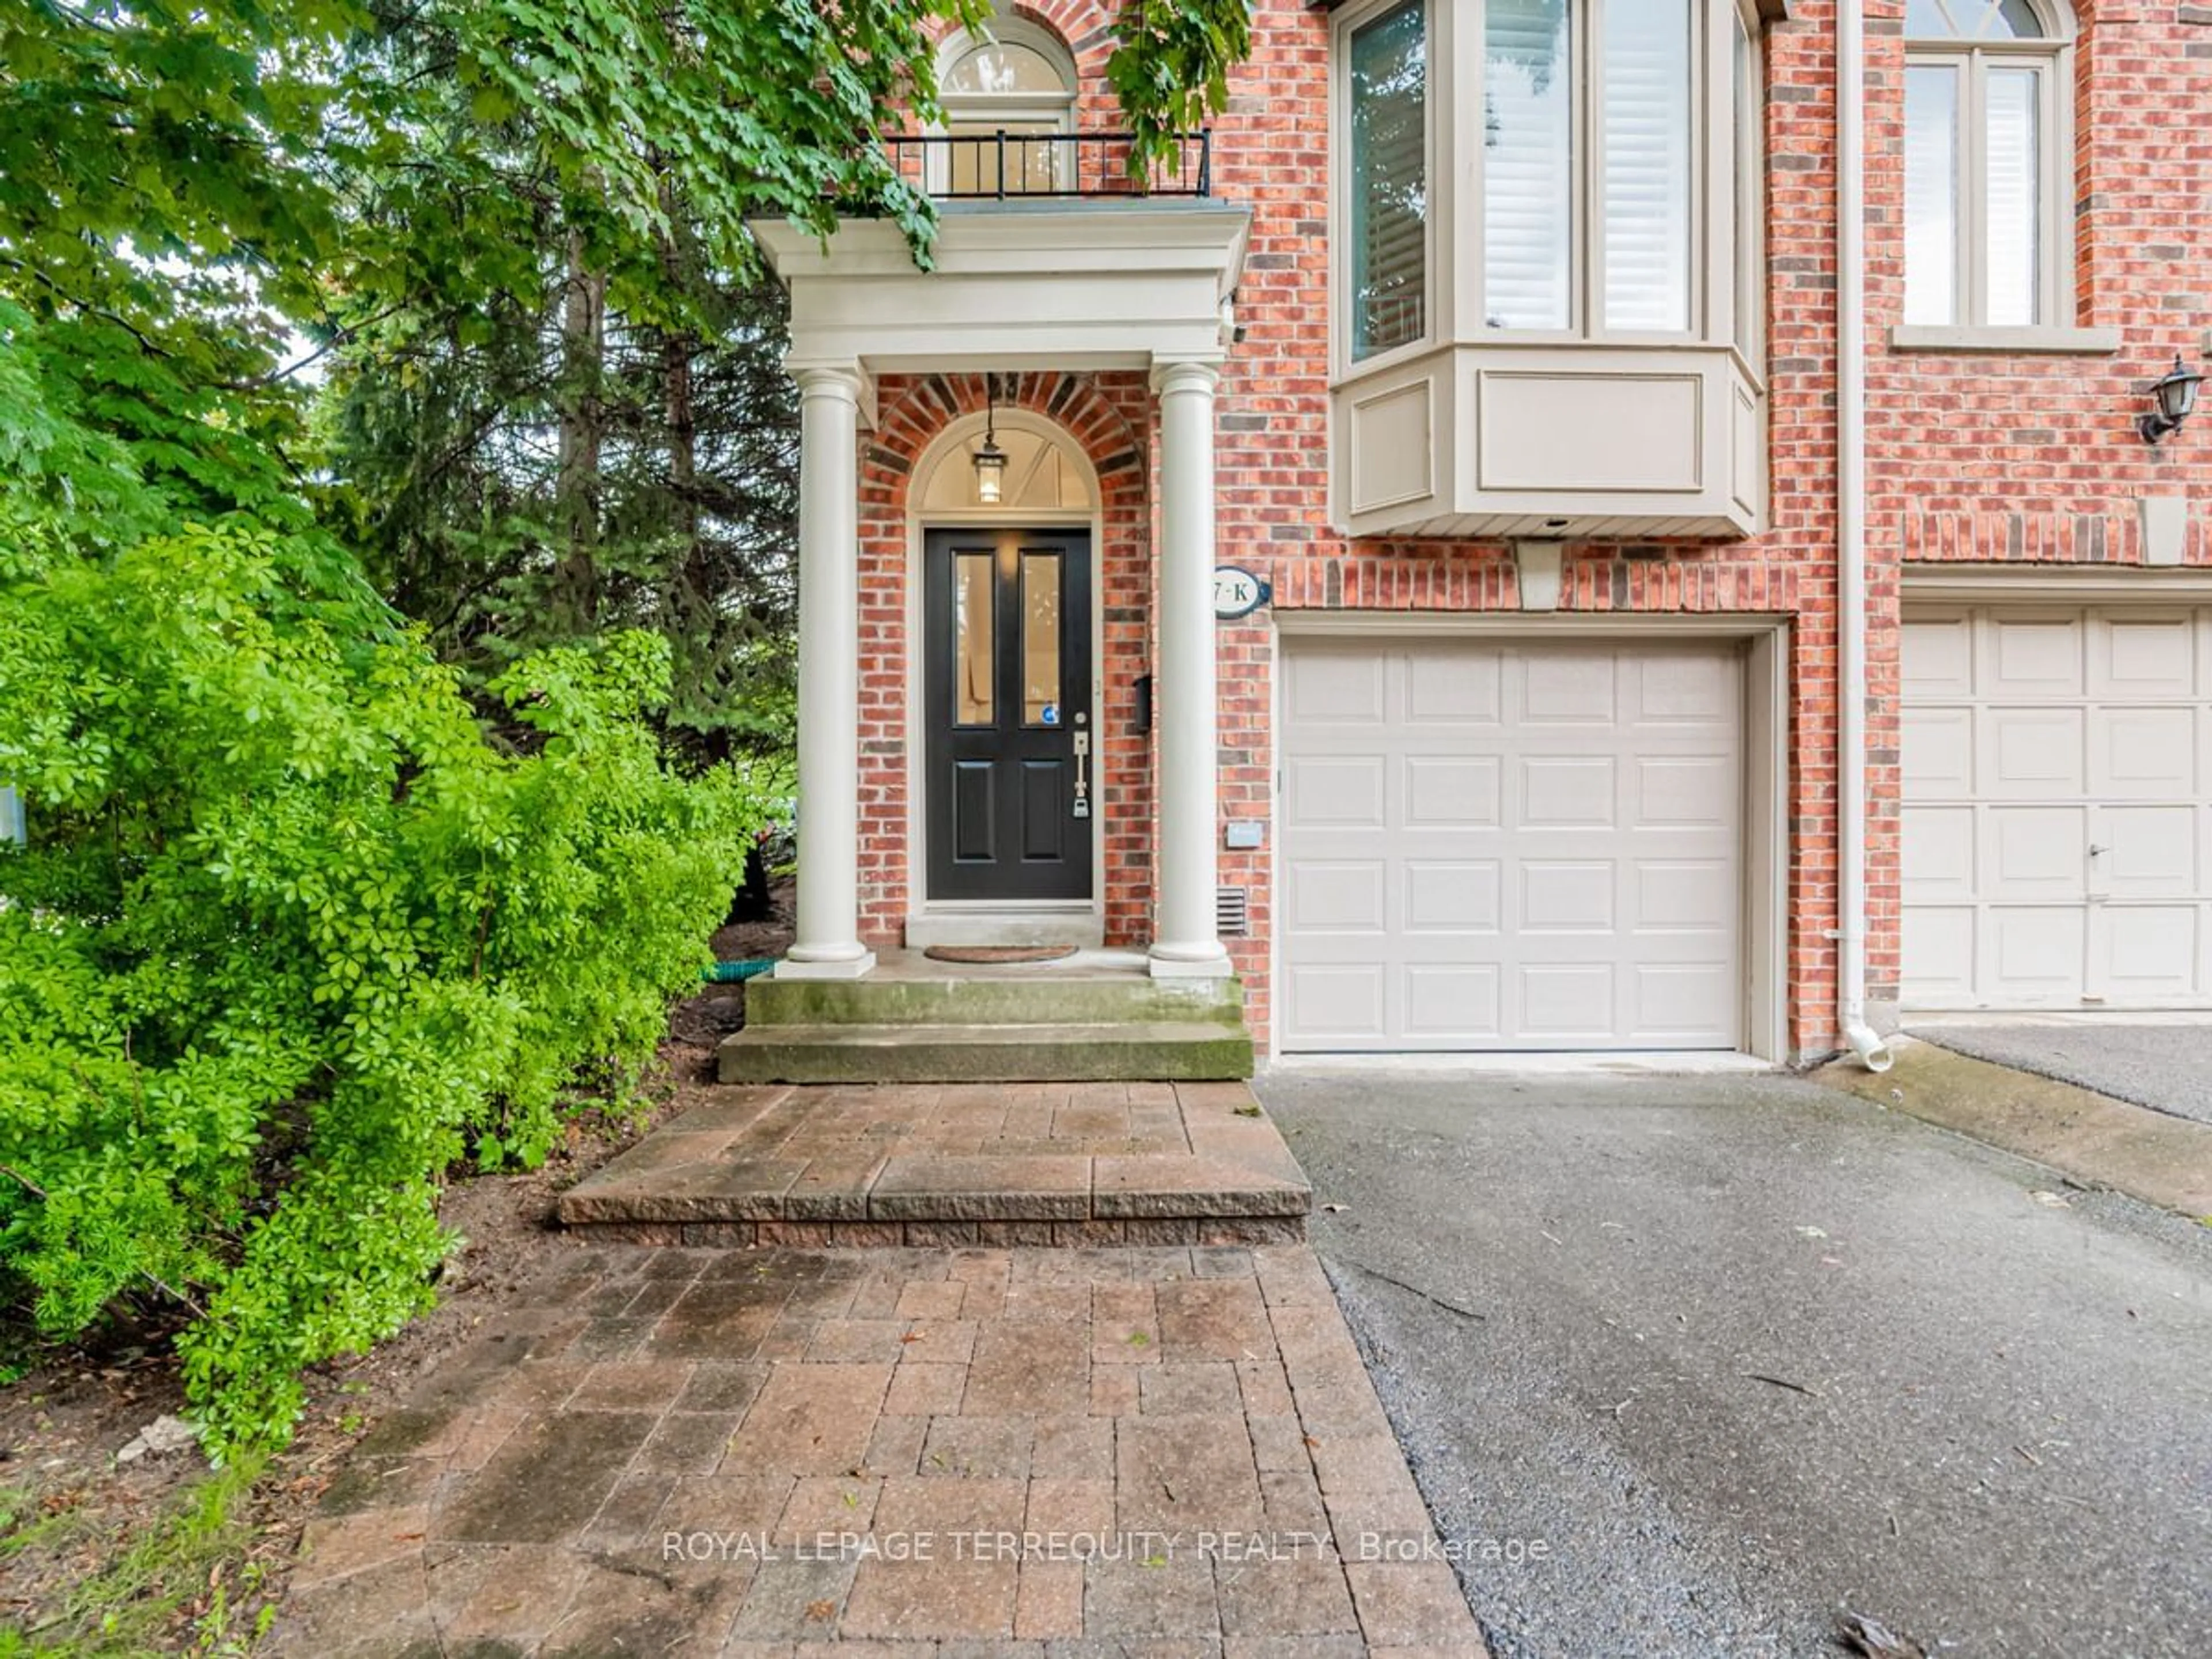 Home with brick exterior material for 7K Brussels St, Toronto Ontario M8Y 1H2